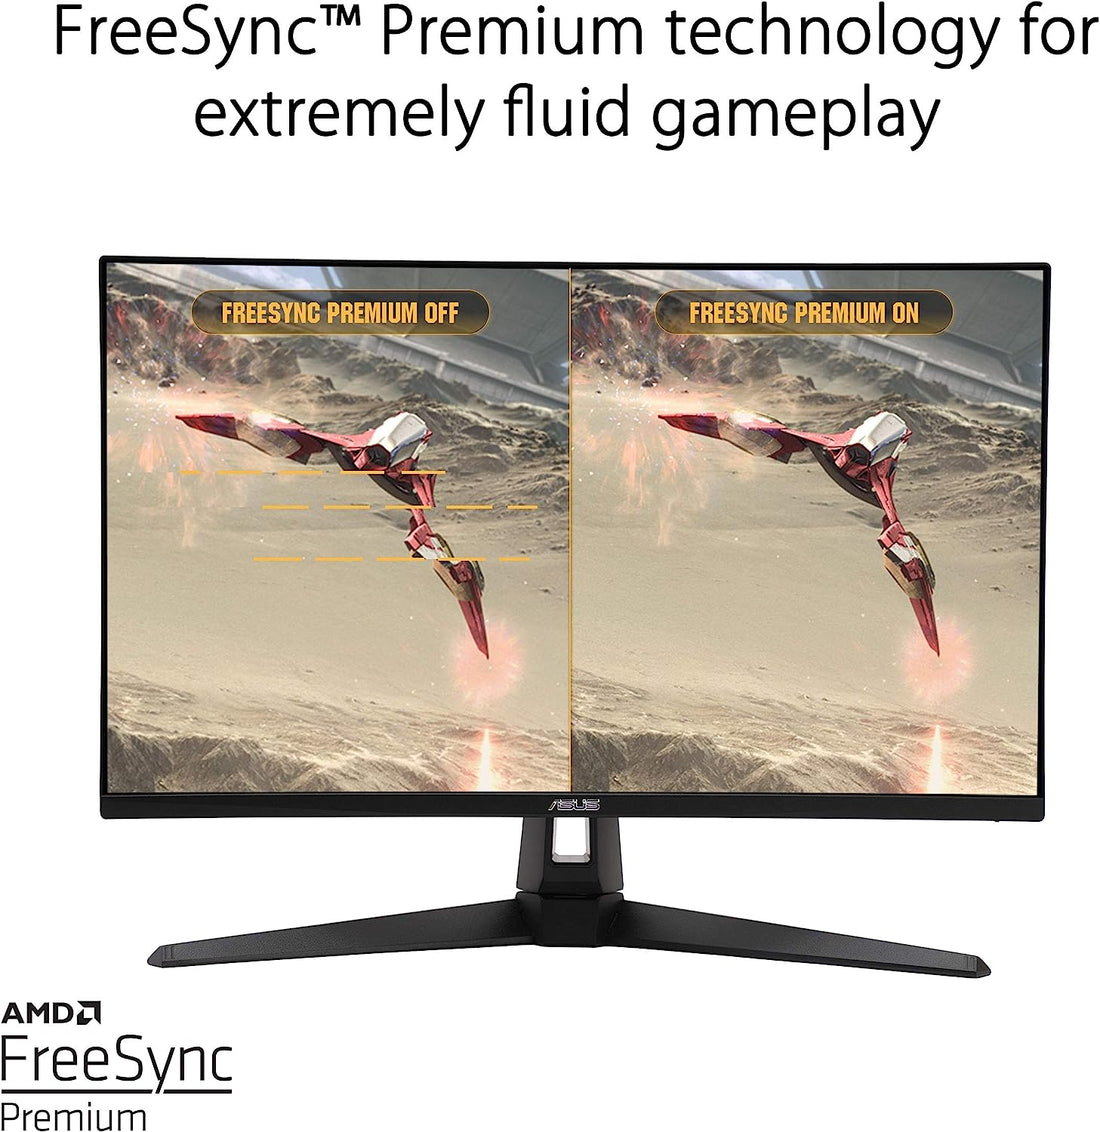 Asus TUF Gaming VG1A 27" Monitor 165Hz, 1MS, Speakers